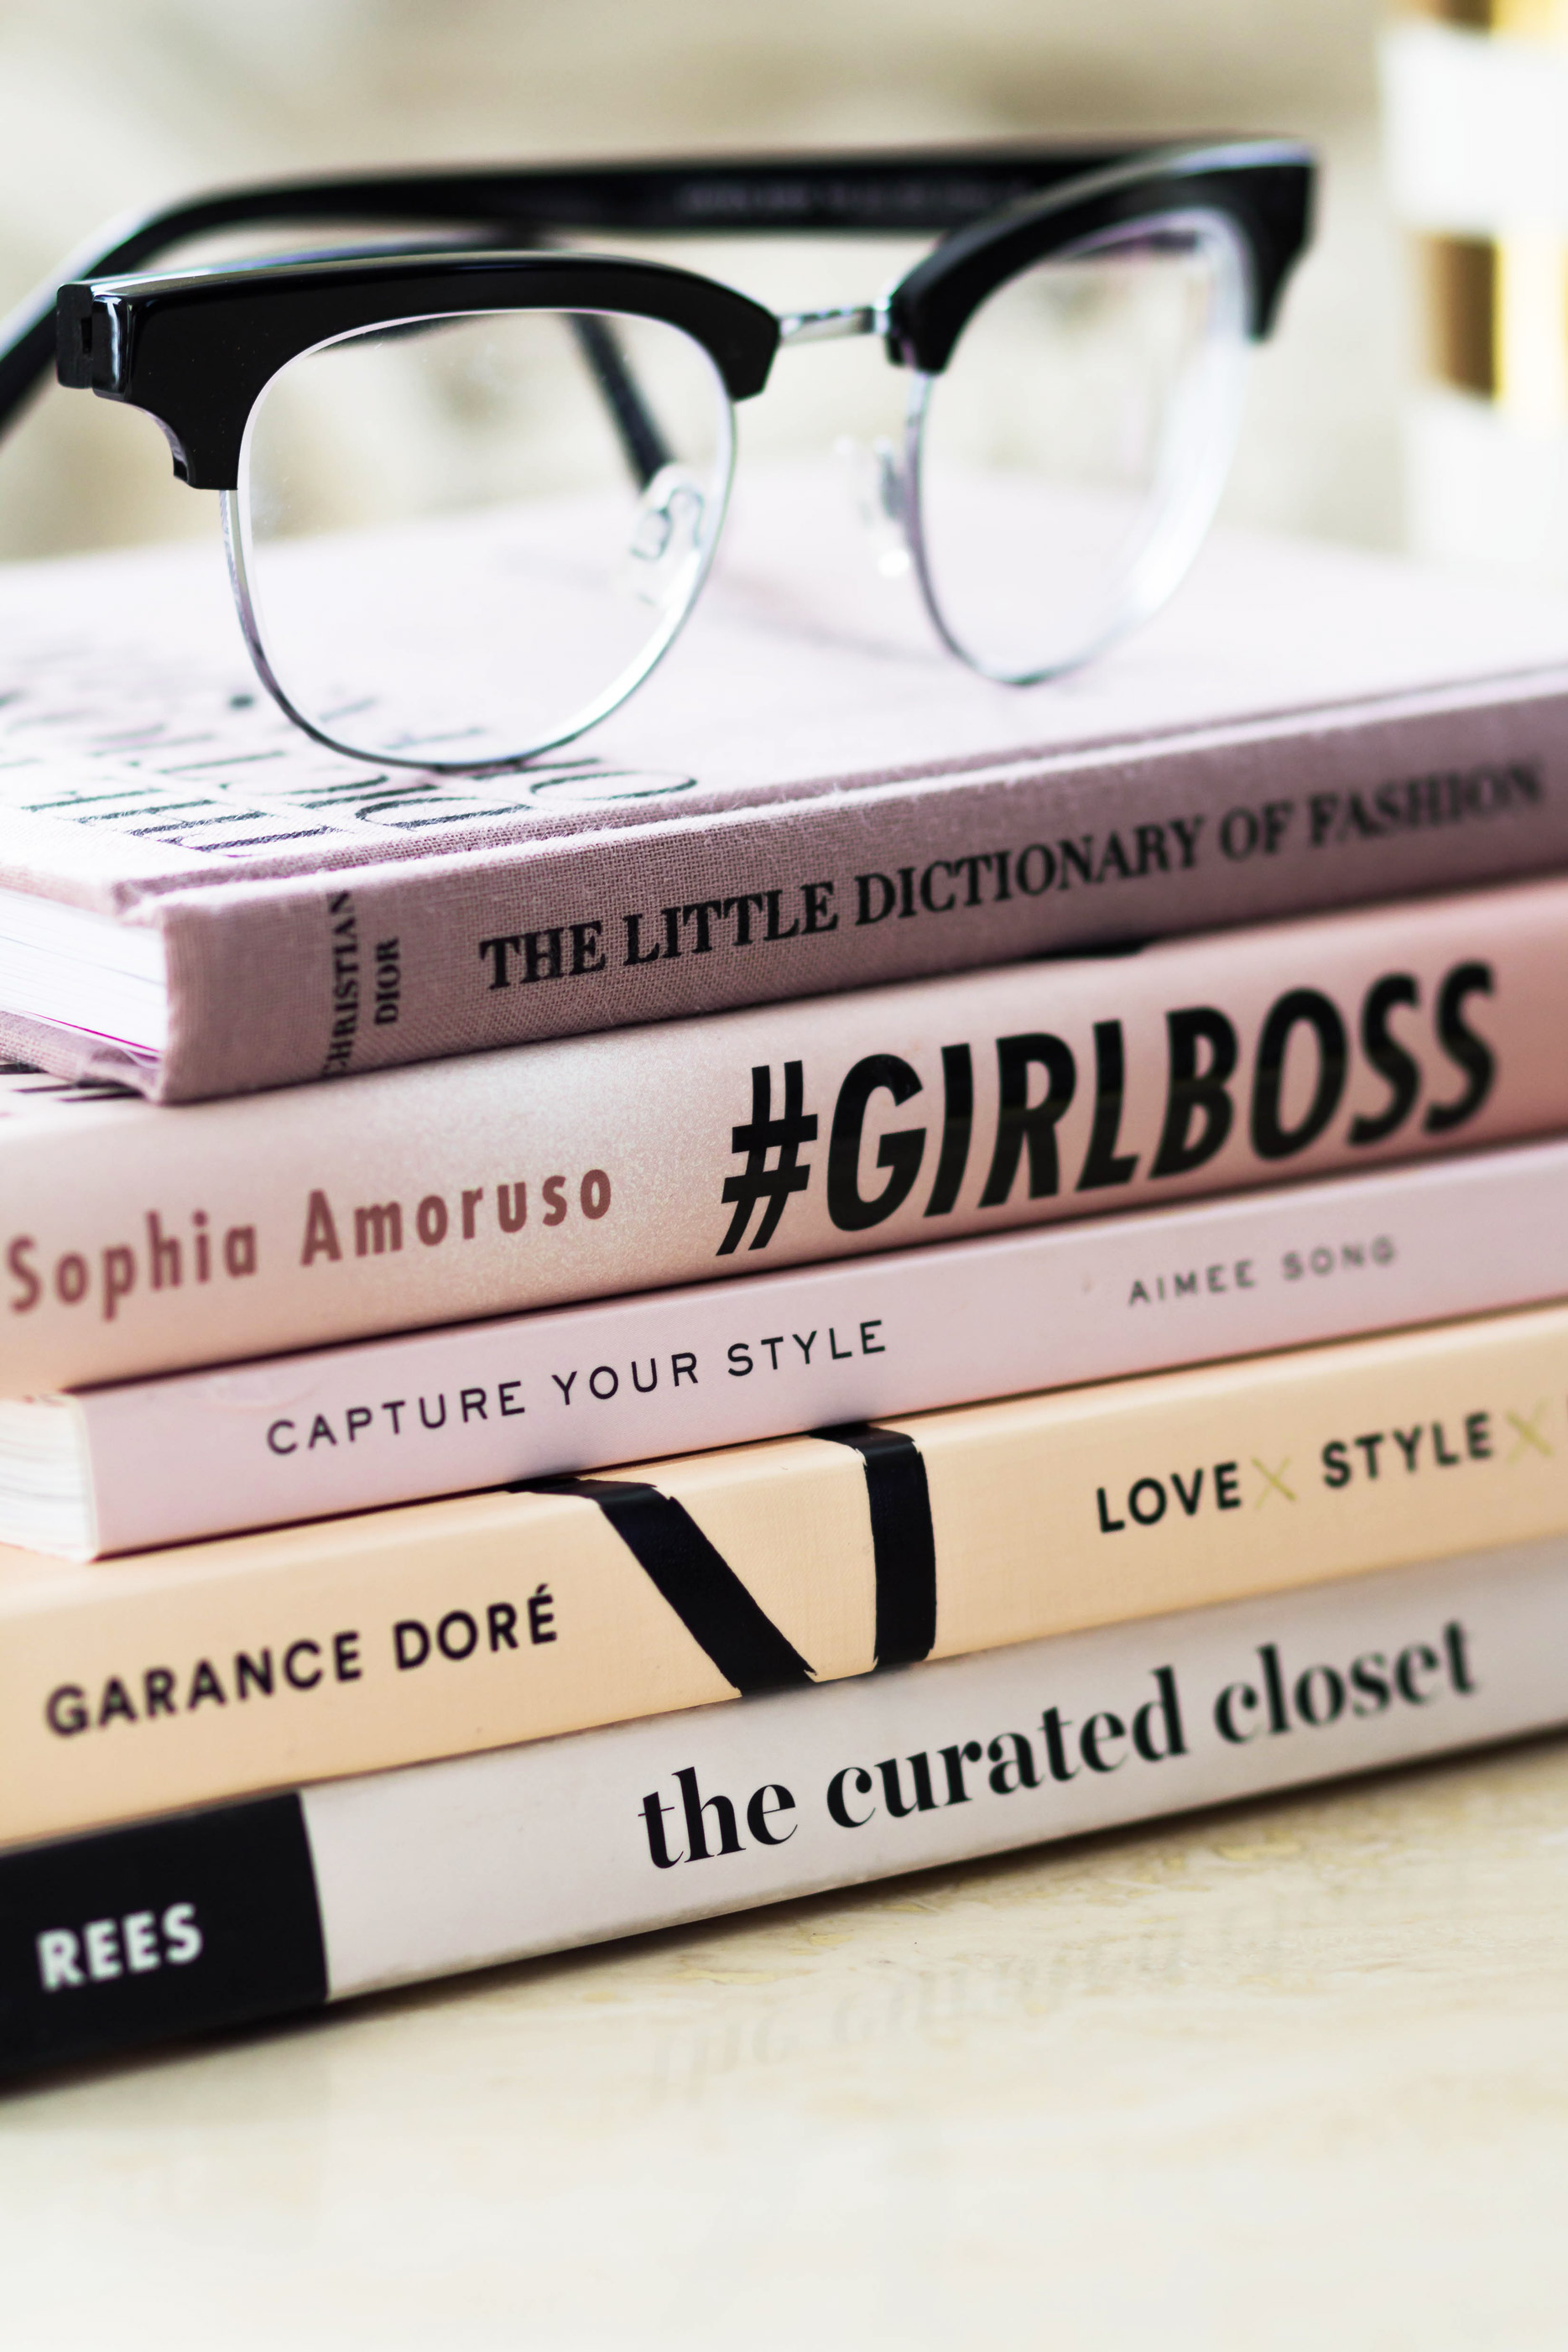 5 Books Every Girl Boss Should Read